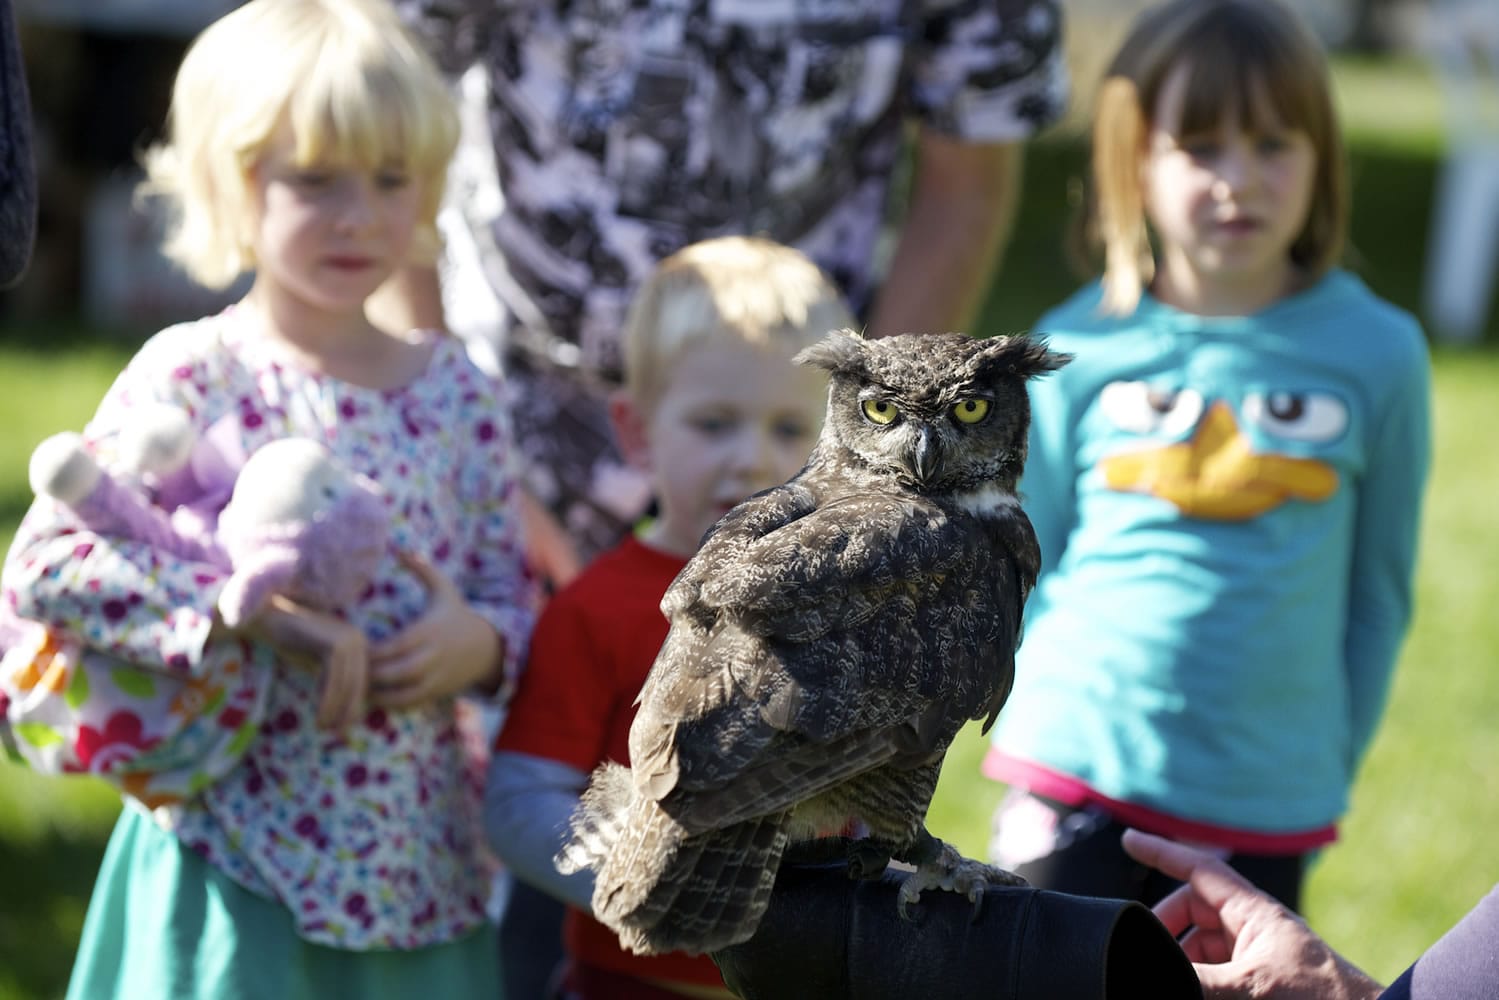 Photos by STEVEN LANE/The Columbian
The Musser kids, from left, Mercedes, 6, Lincoln, 3, and Alexis, 7, from Kelso stop to see Julio, a great horned owl visiting from the Portland Audubon Society during the Birdfest celebration in Ridgefield on Sunday. About 3,000 people visited the weekend festival.